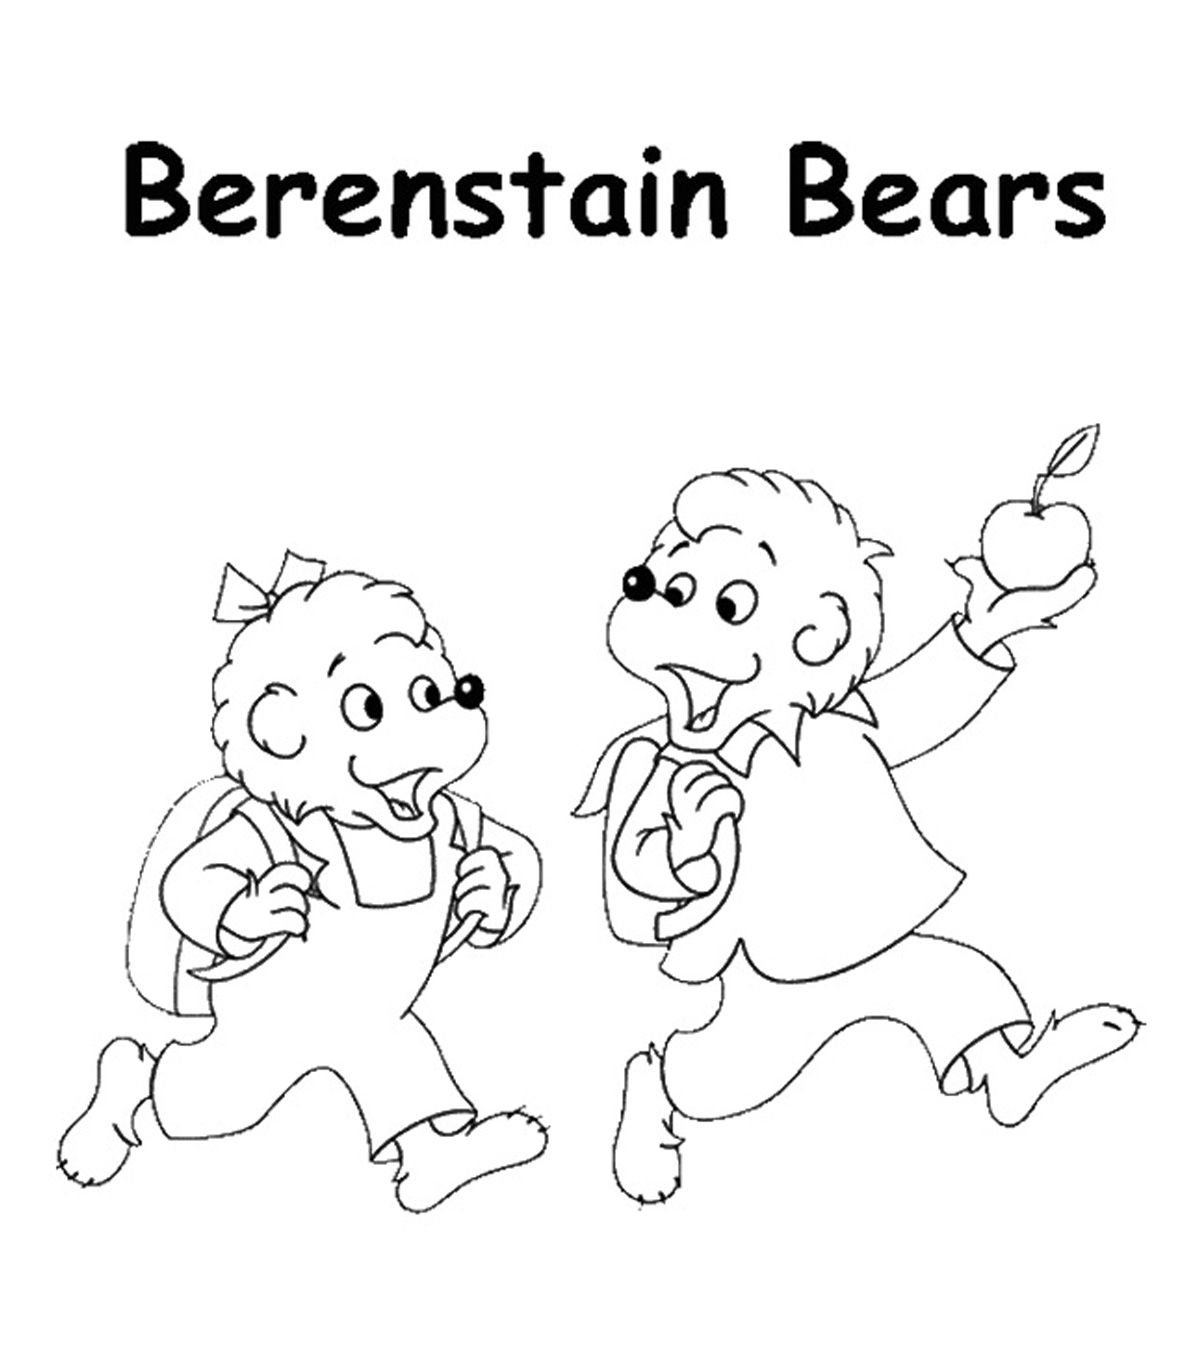 Coloring Pages Of Berenstain Bears - Coloring Walls